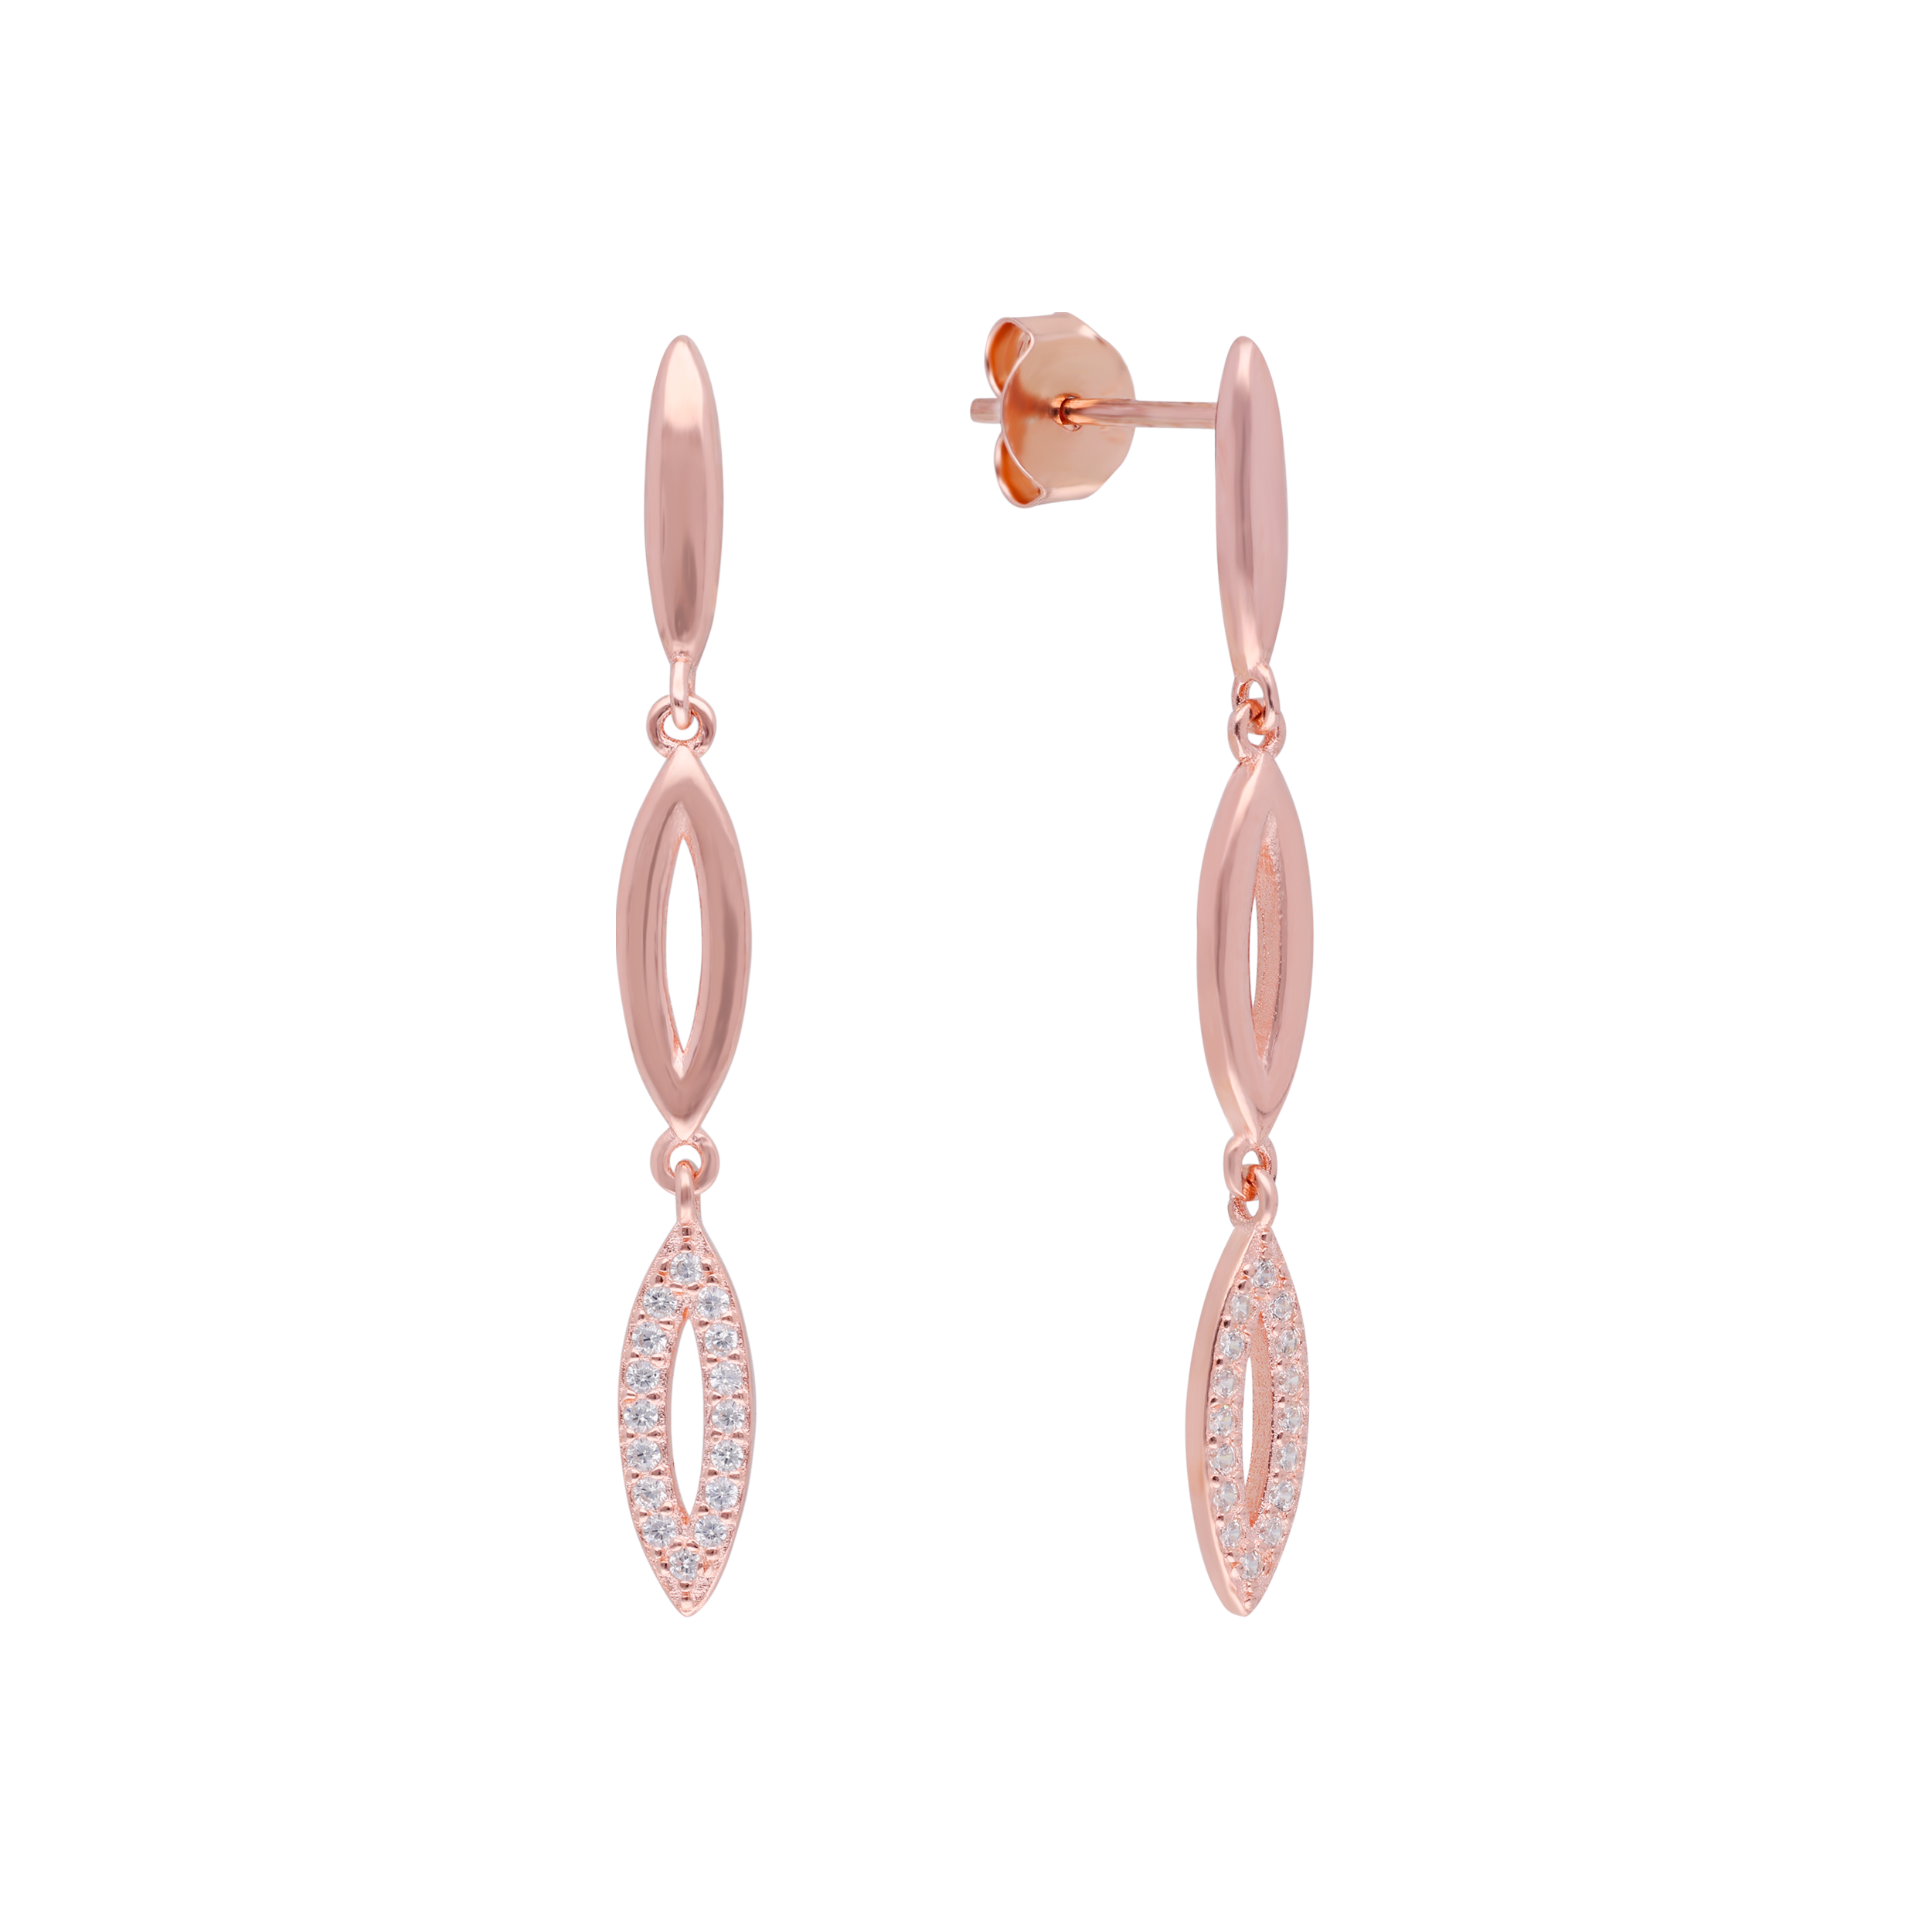 Radiant Elegance: Rose Gold Long Ear Drops with Cubic Zirconia Accents | SKU : 0019799384, 0019799353, 0019799360